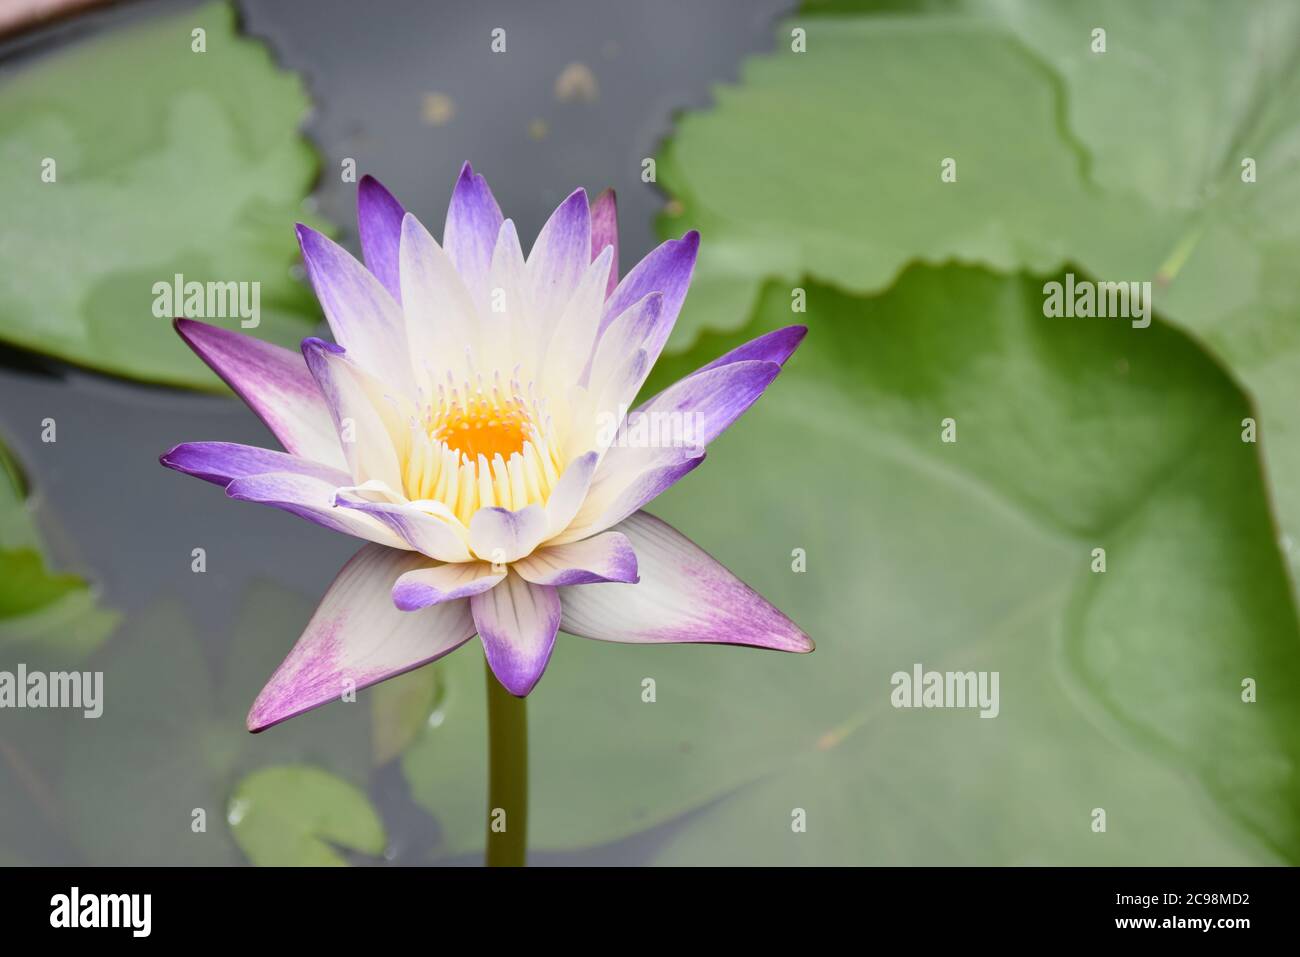 Violet Lotus flower or Pygmy waterlily on water. Stock Photo